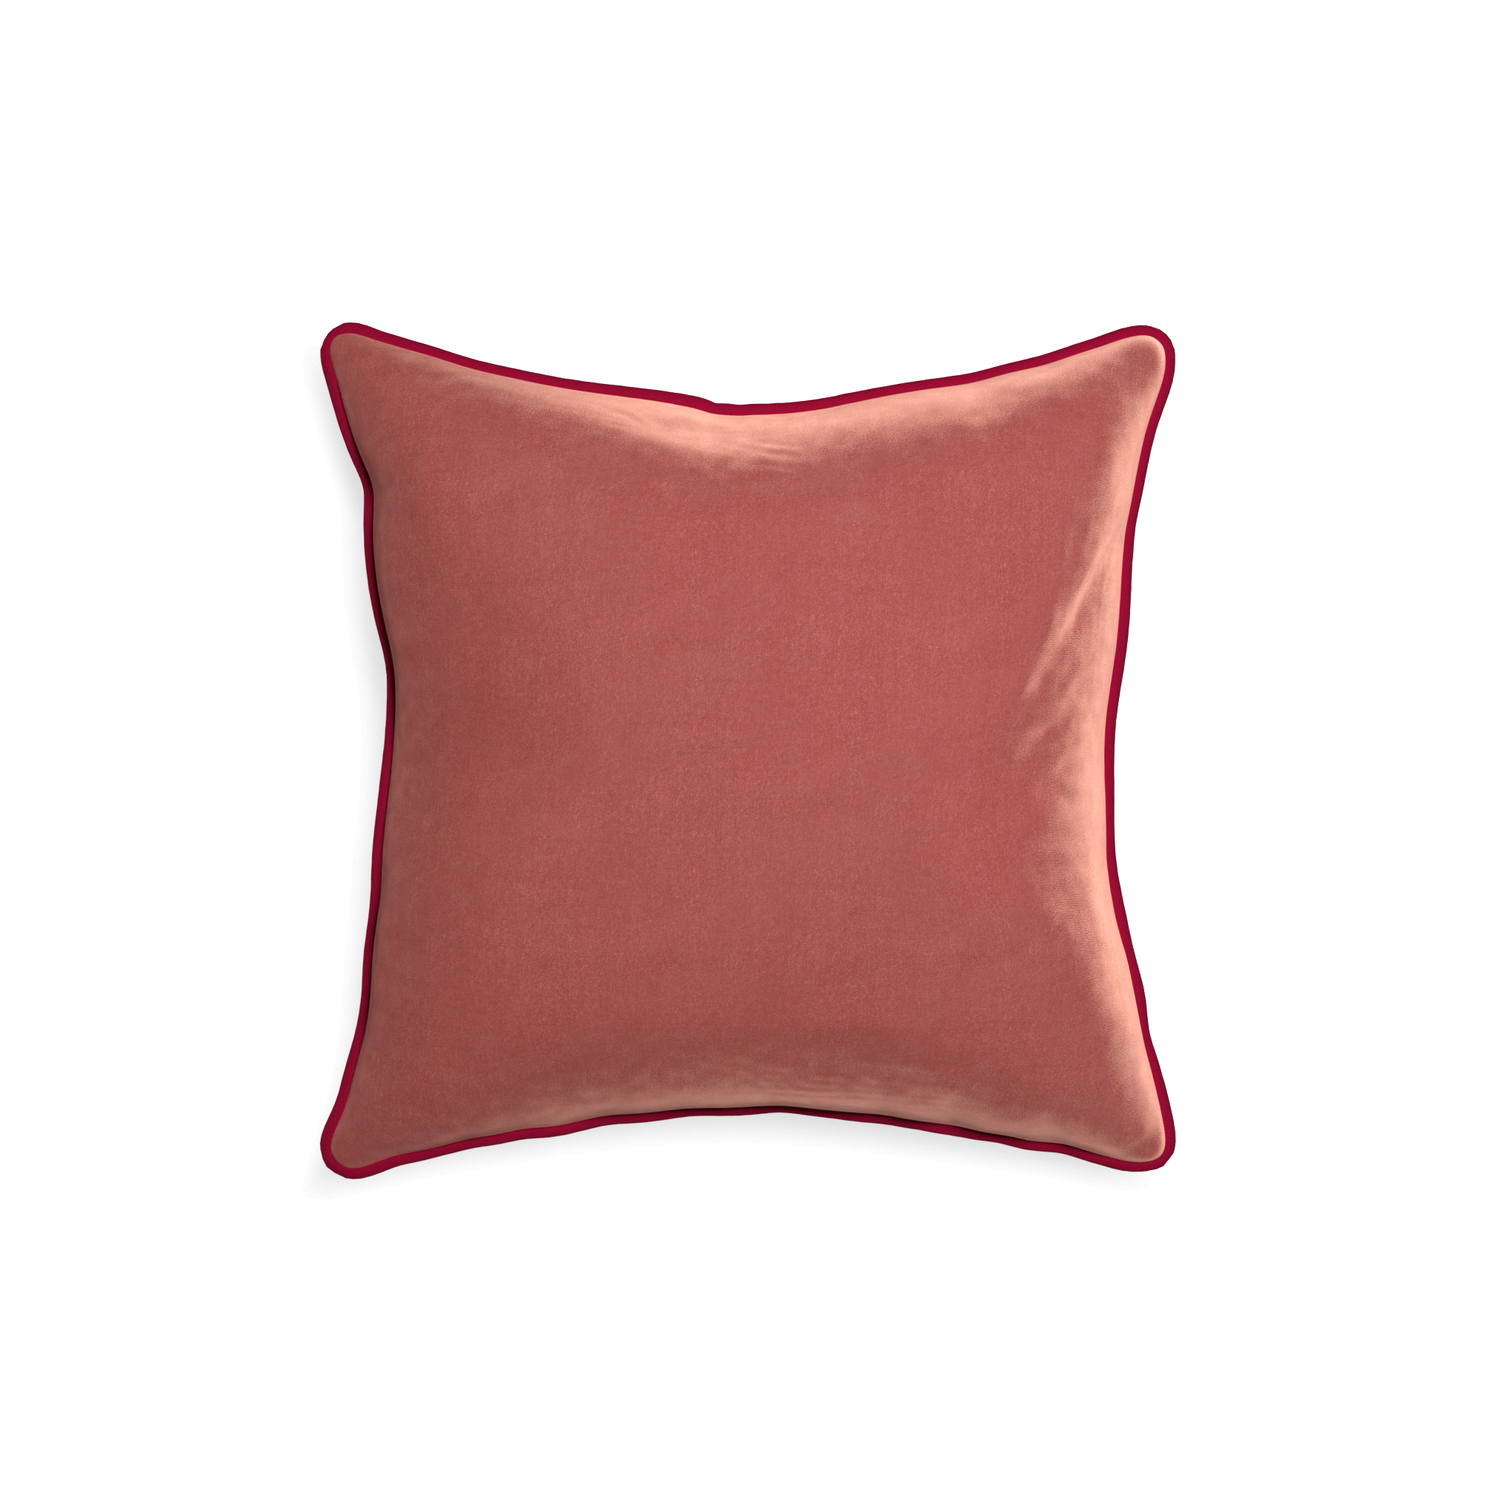 18-square cosmo velvet custom pillow with raspberry piping on white background